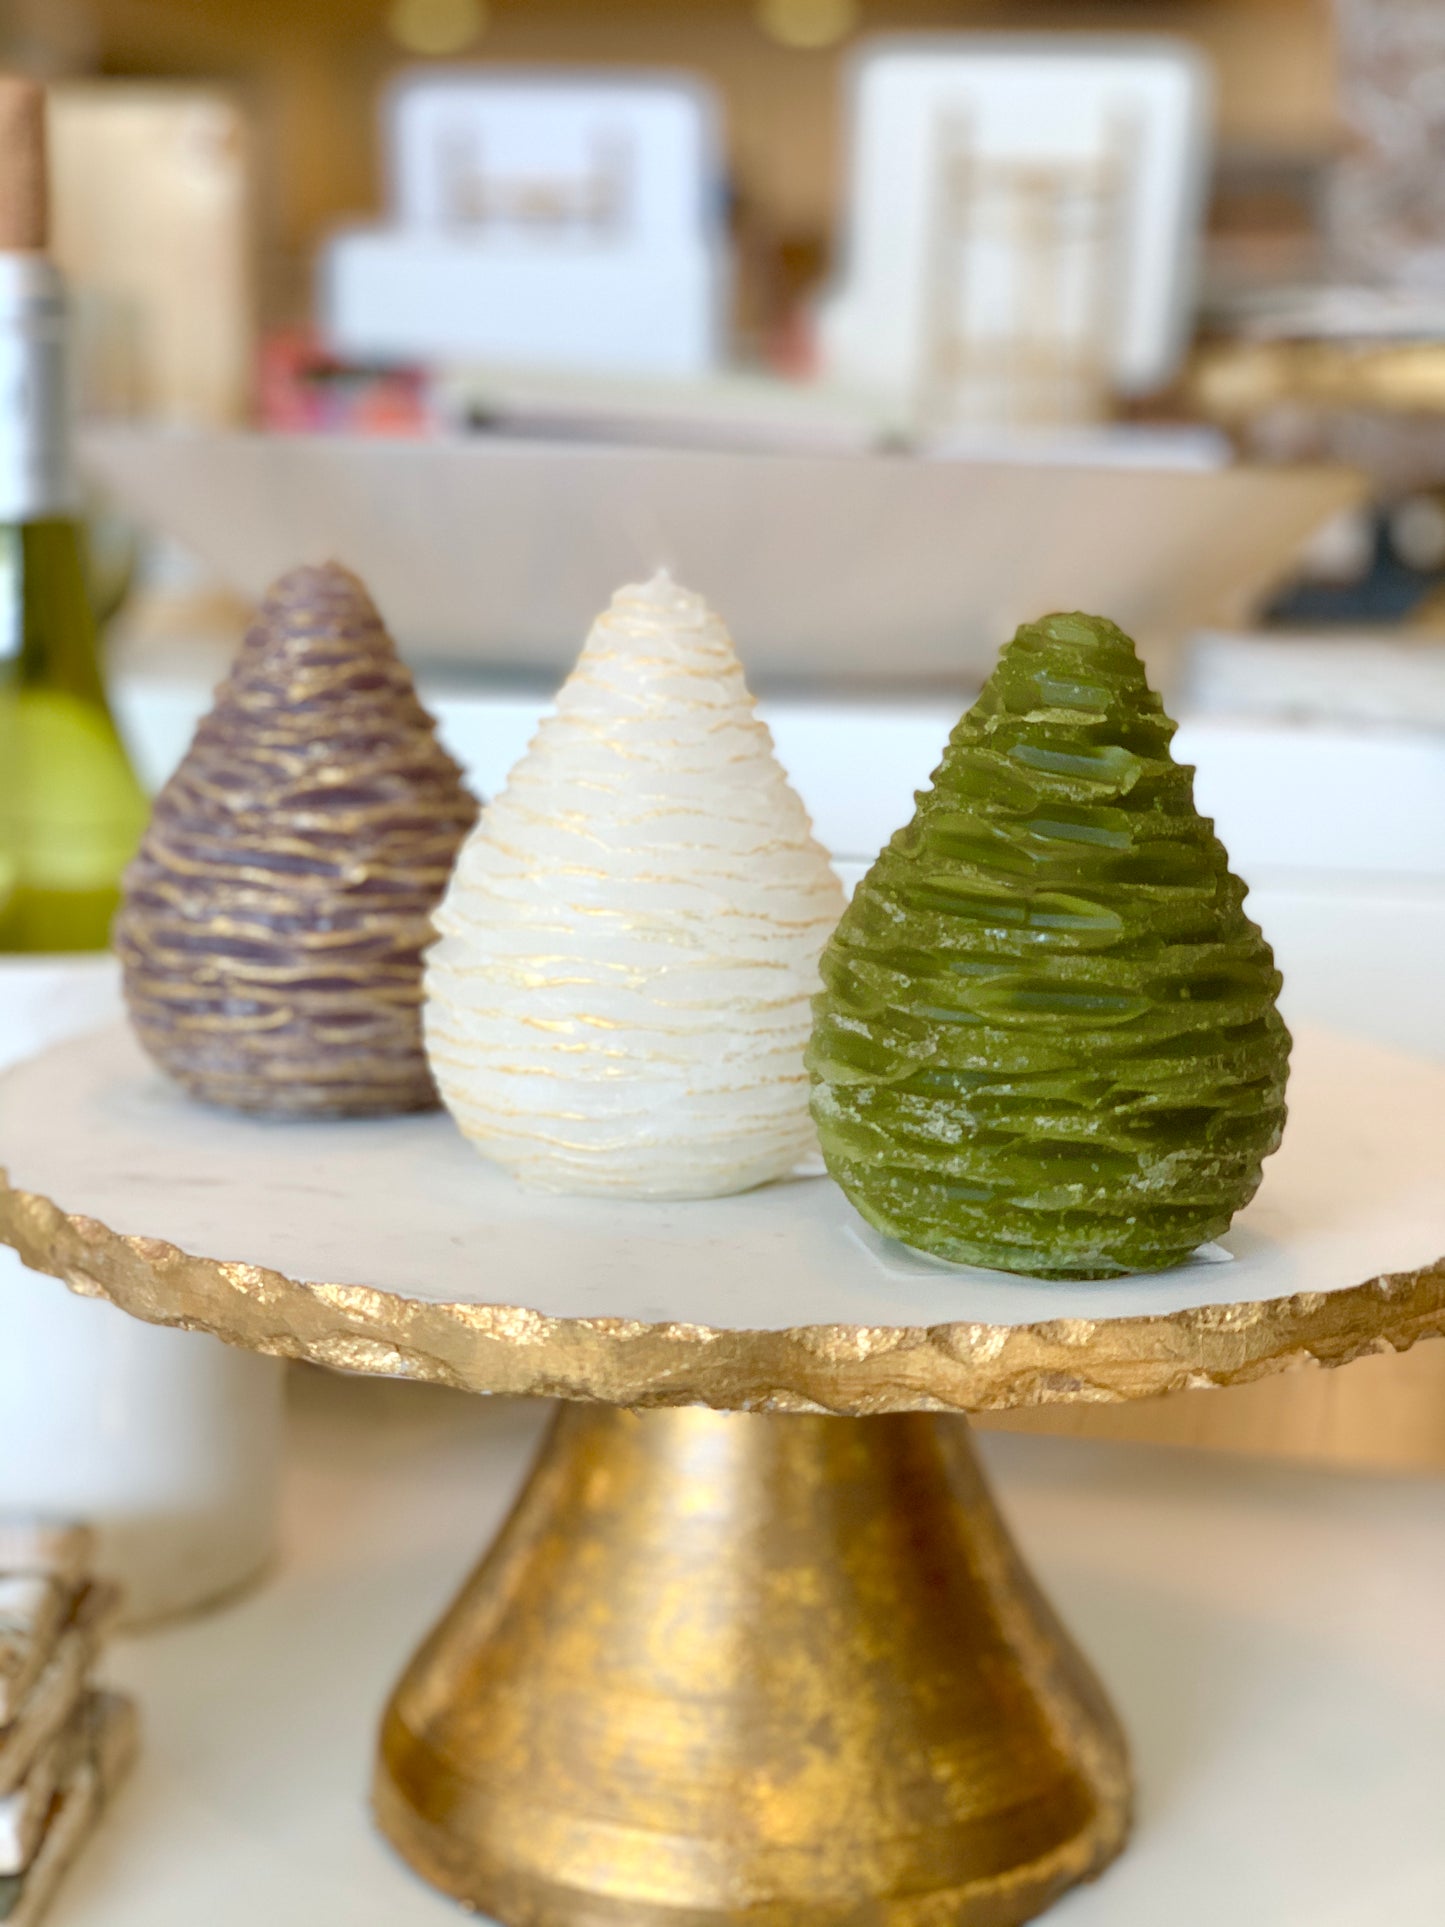 Pine Cone Candle-Small